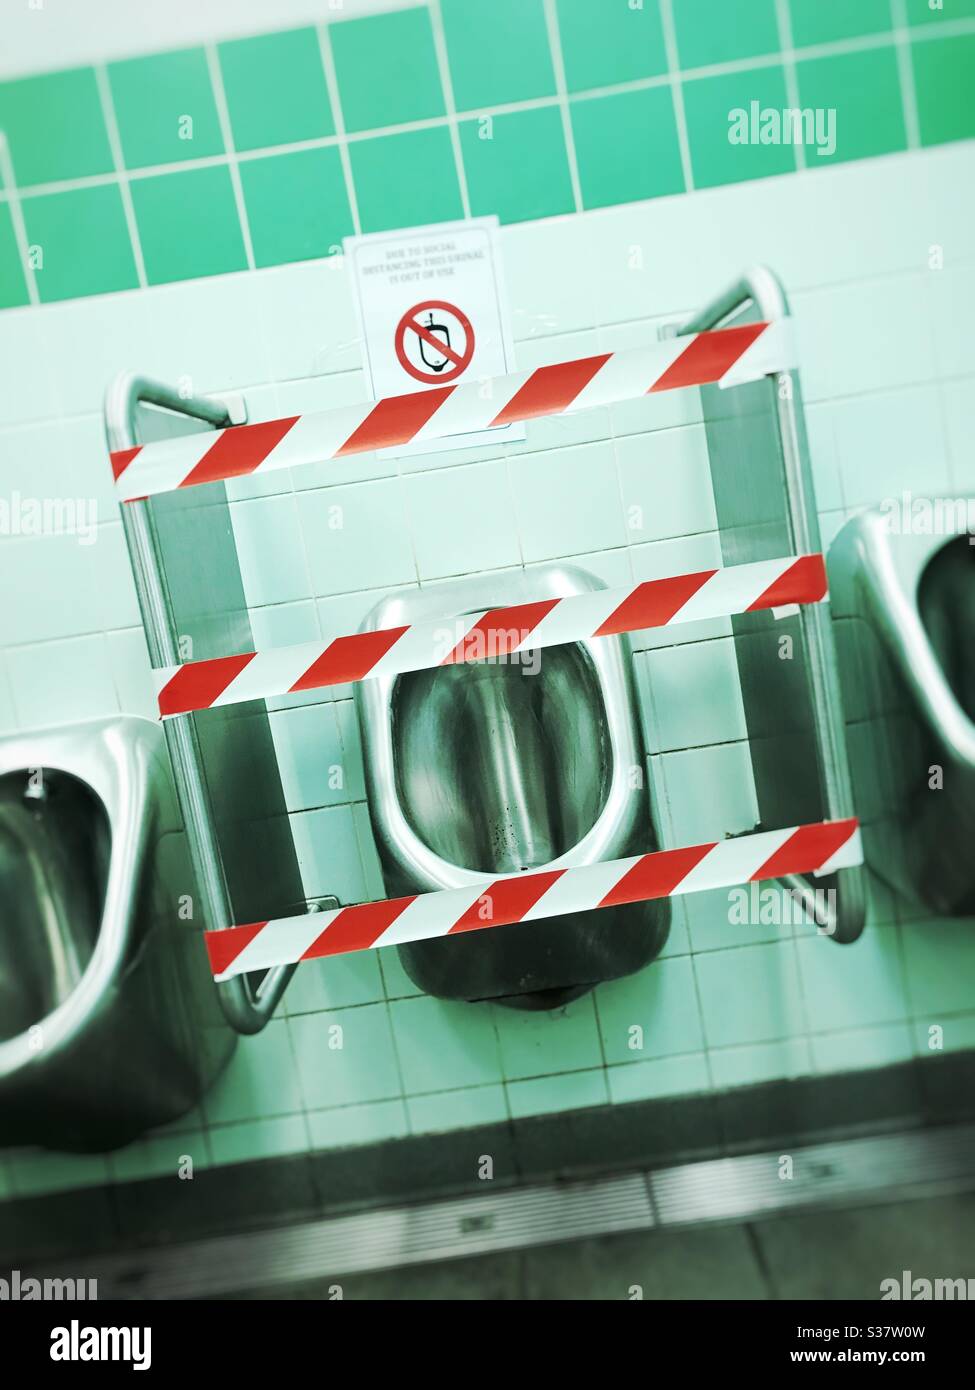 Pub toilets with middle gents urinal taped off due to Coronavirus social distancing rules as pubs re-open July 2020 UK Stock Photo